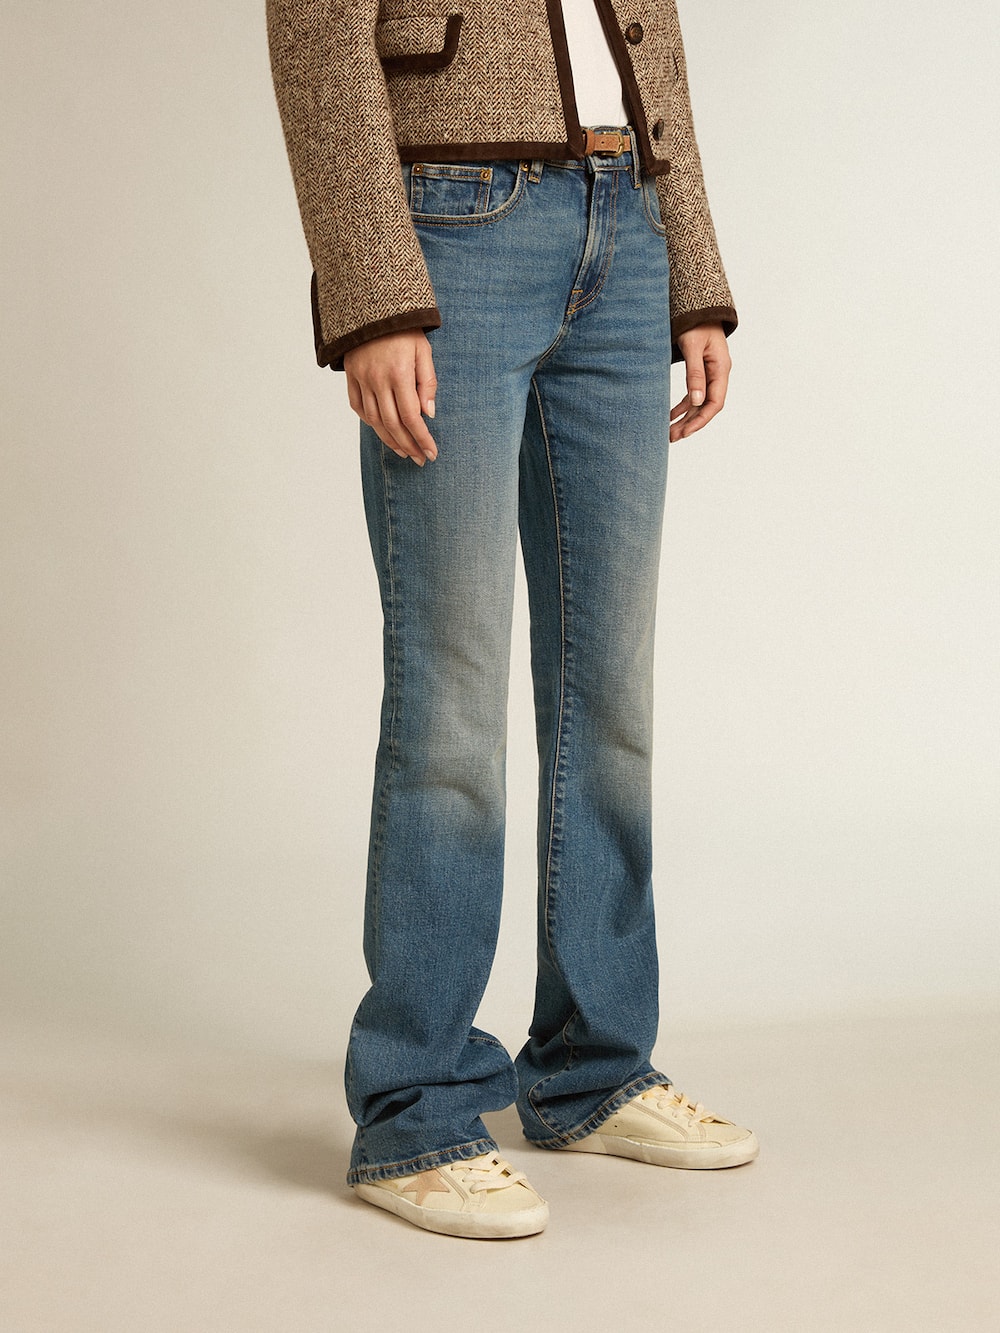 Golden Goose - Blue jeans in elasticated fabric in 